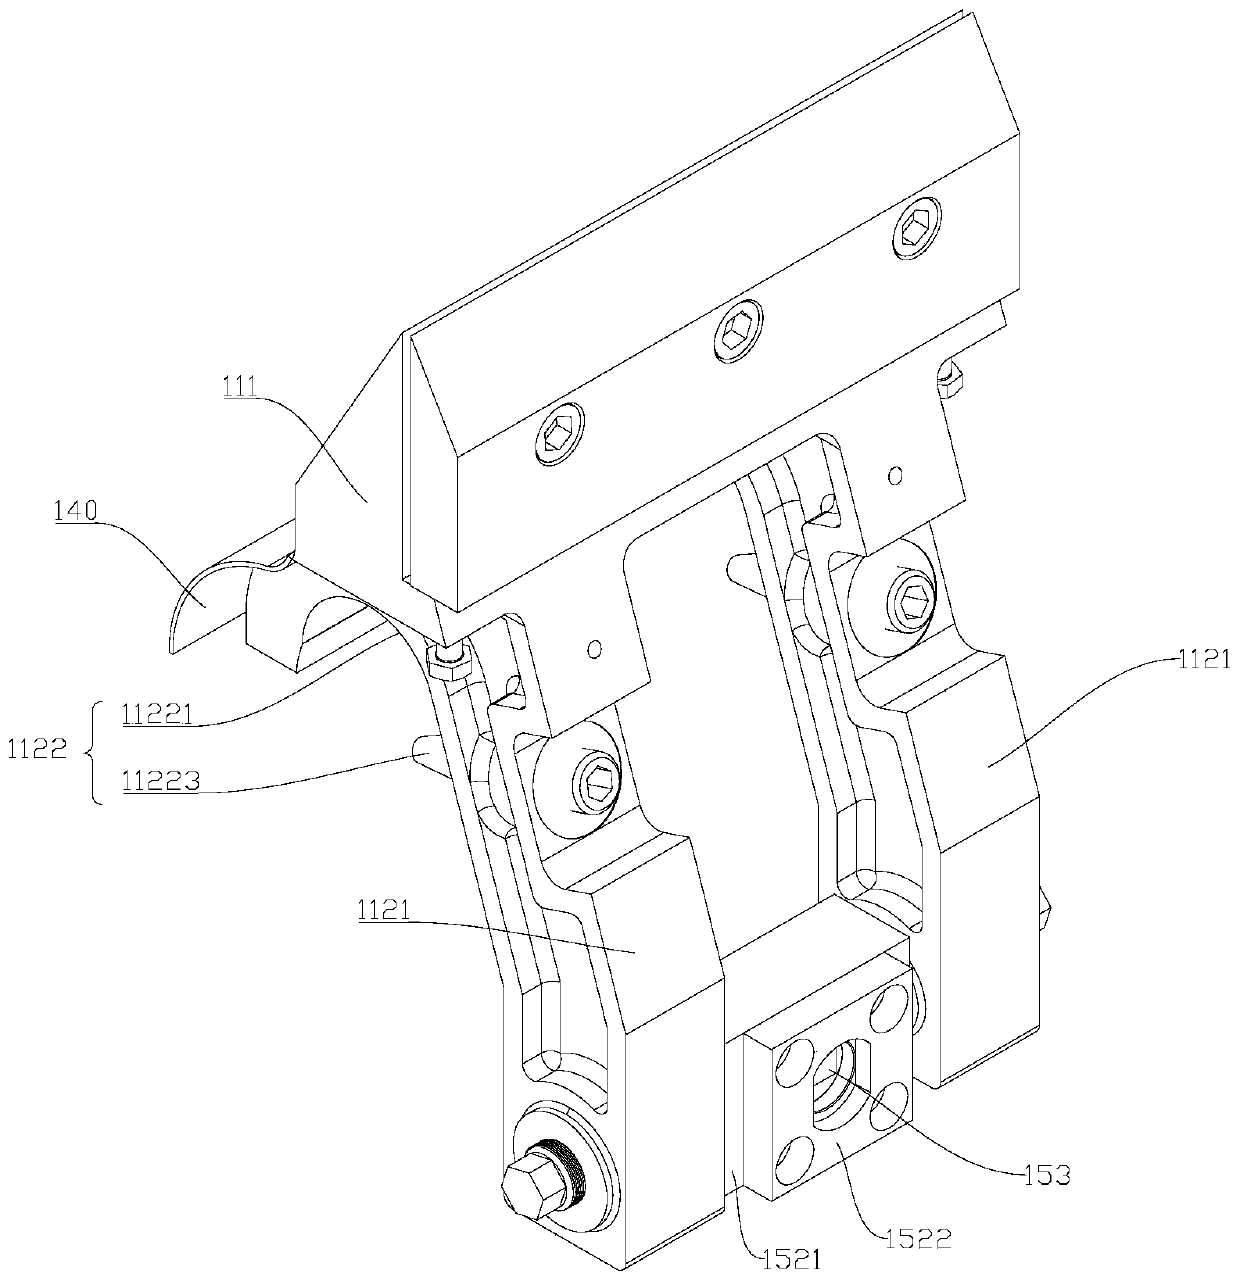 Knife rest structure, knife blade structure, knife blade mechanism, and rotary drum structure